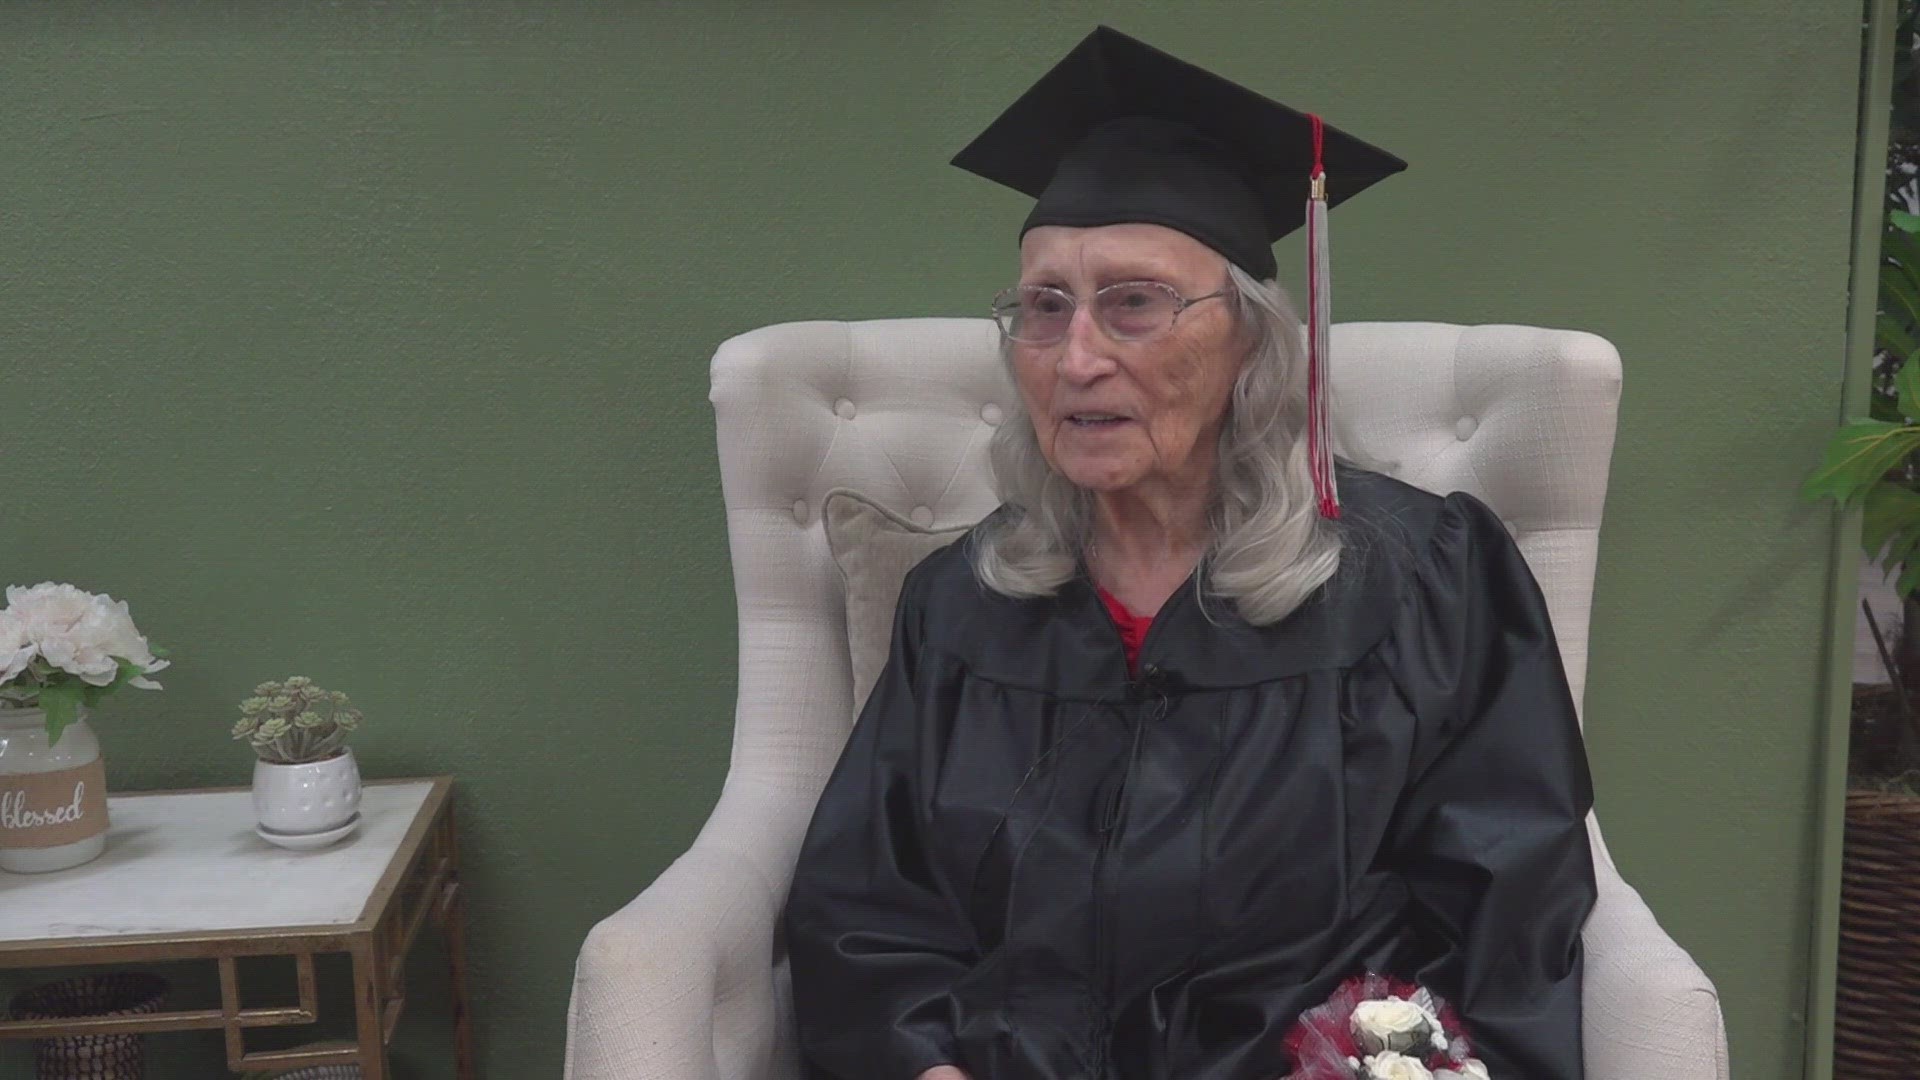 Margie Ward has owned a business in Big Spring for 70+ years, but she never went to high school. In 2022, she decided she was going to strive for higher education.